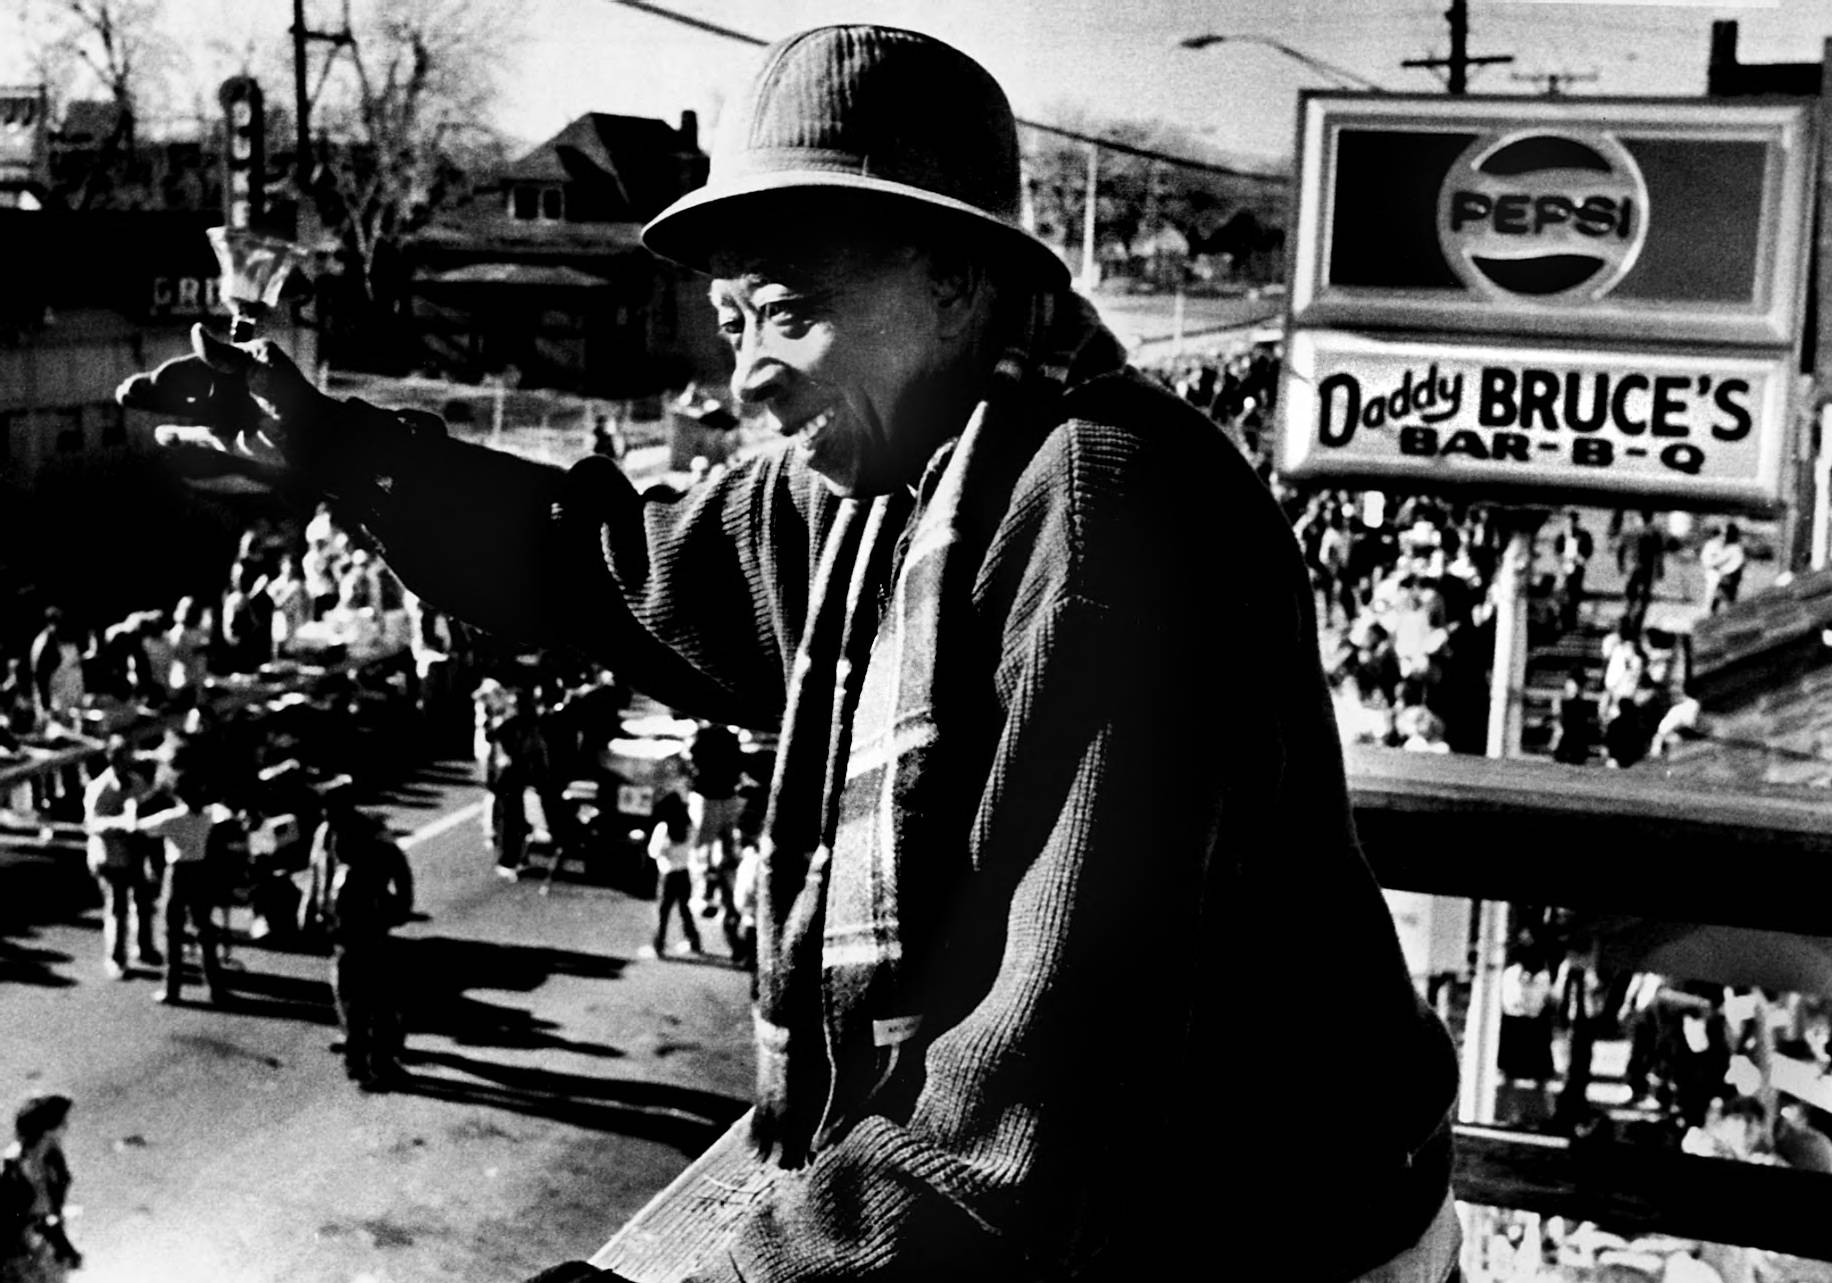 A black and white photograph of Daddy Bruce waving to a crowd. He wears a coat and a hat, and behind him is a sign which reads "Daddy Bruce's Barbecue."